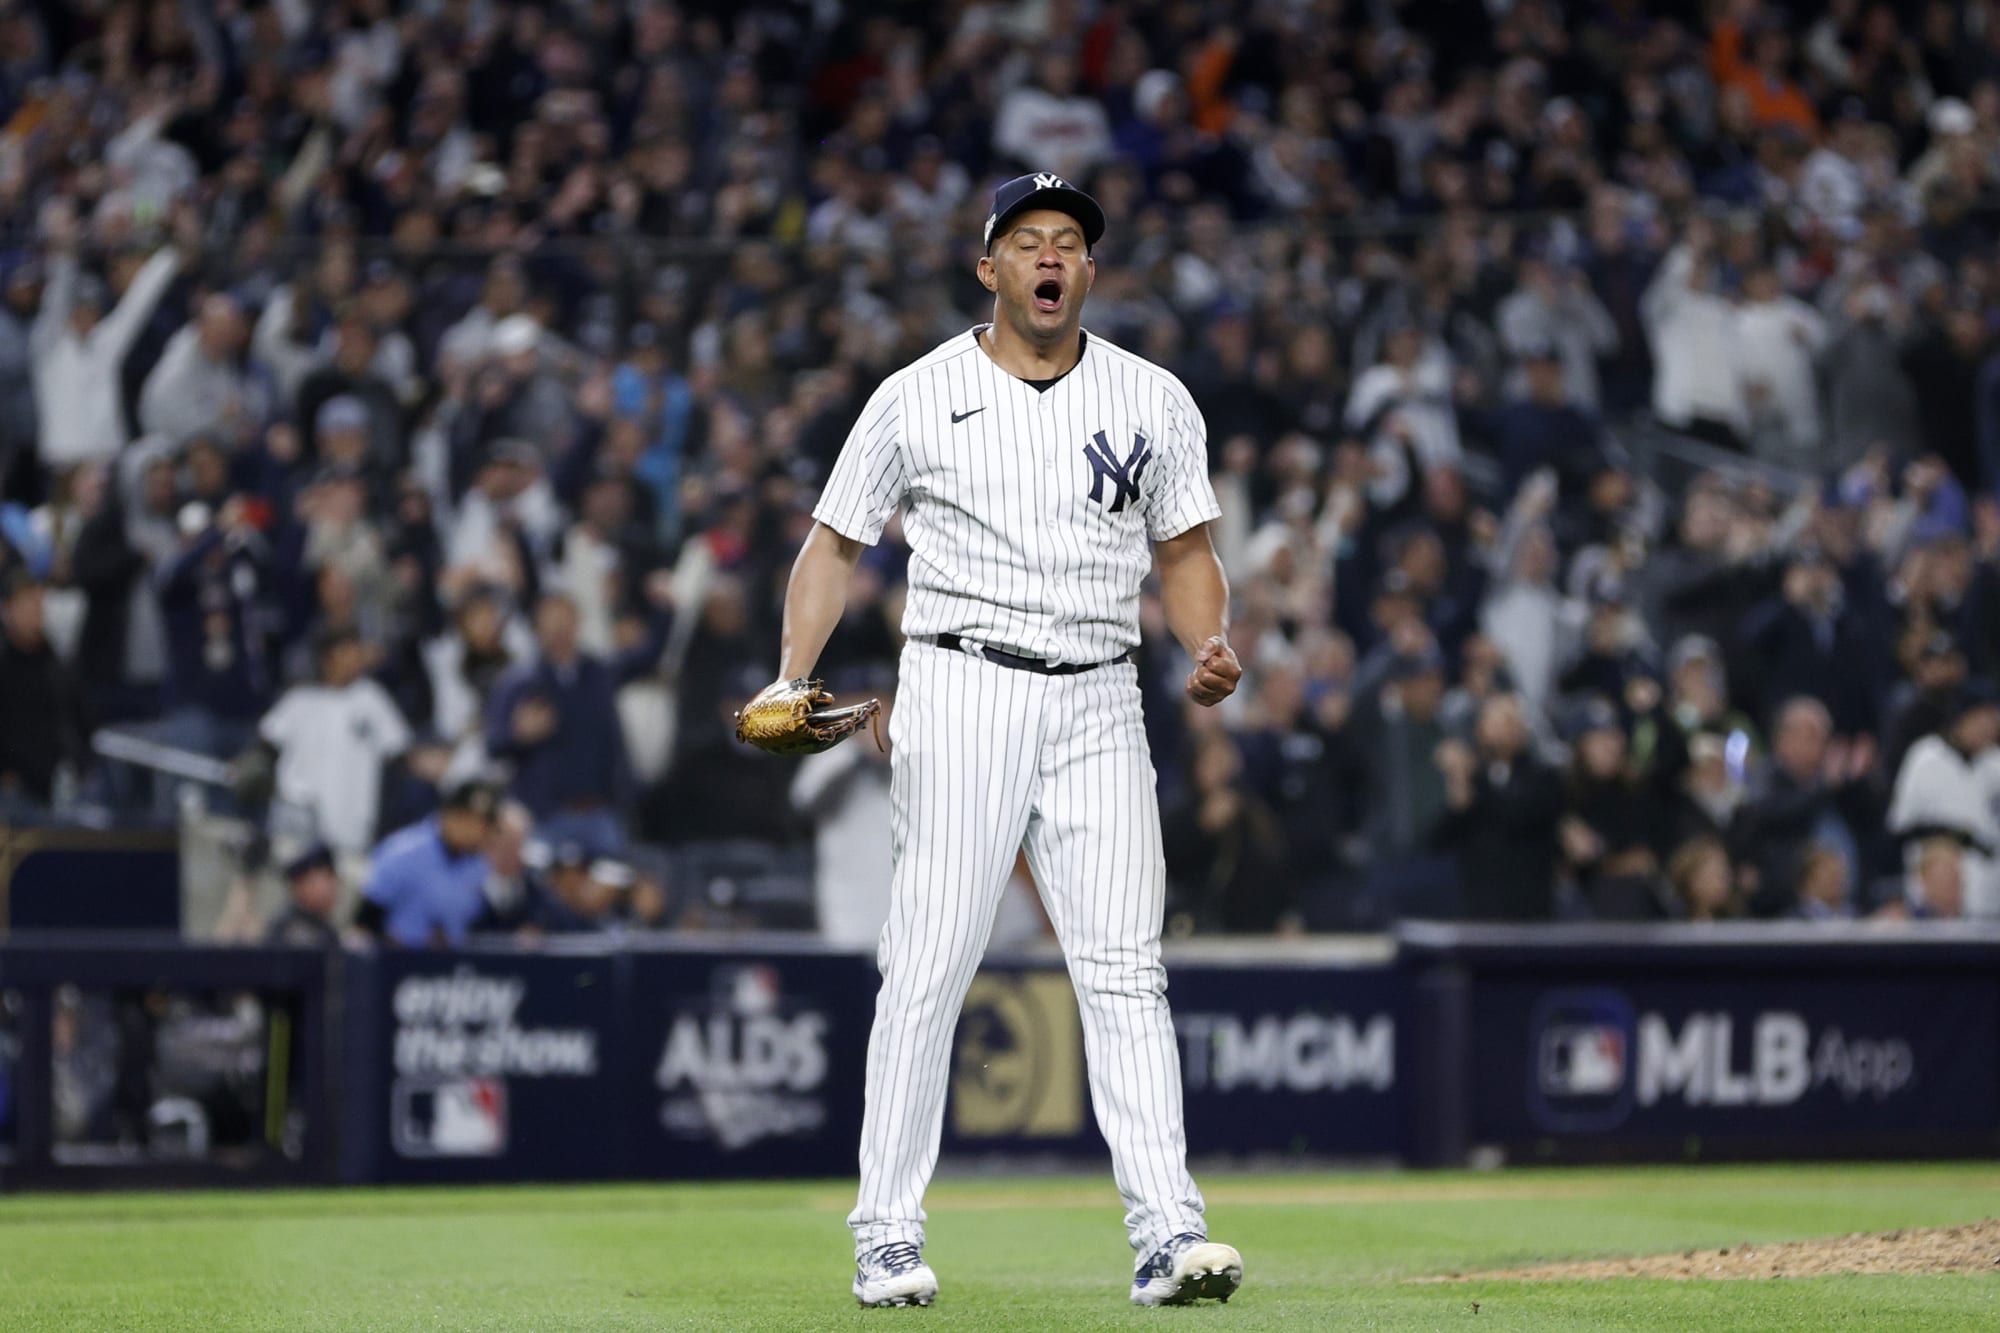 Wandy Peralta's end-of-season IG post to Yankees fans shows he